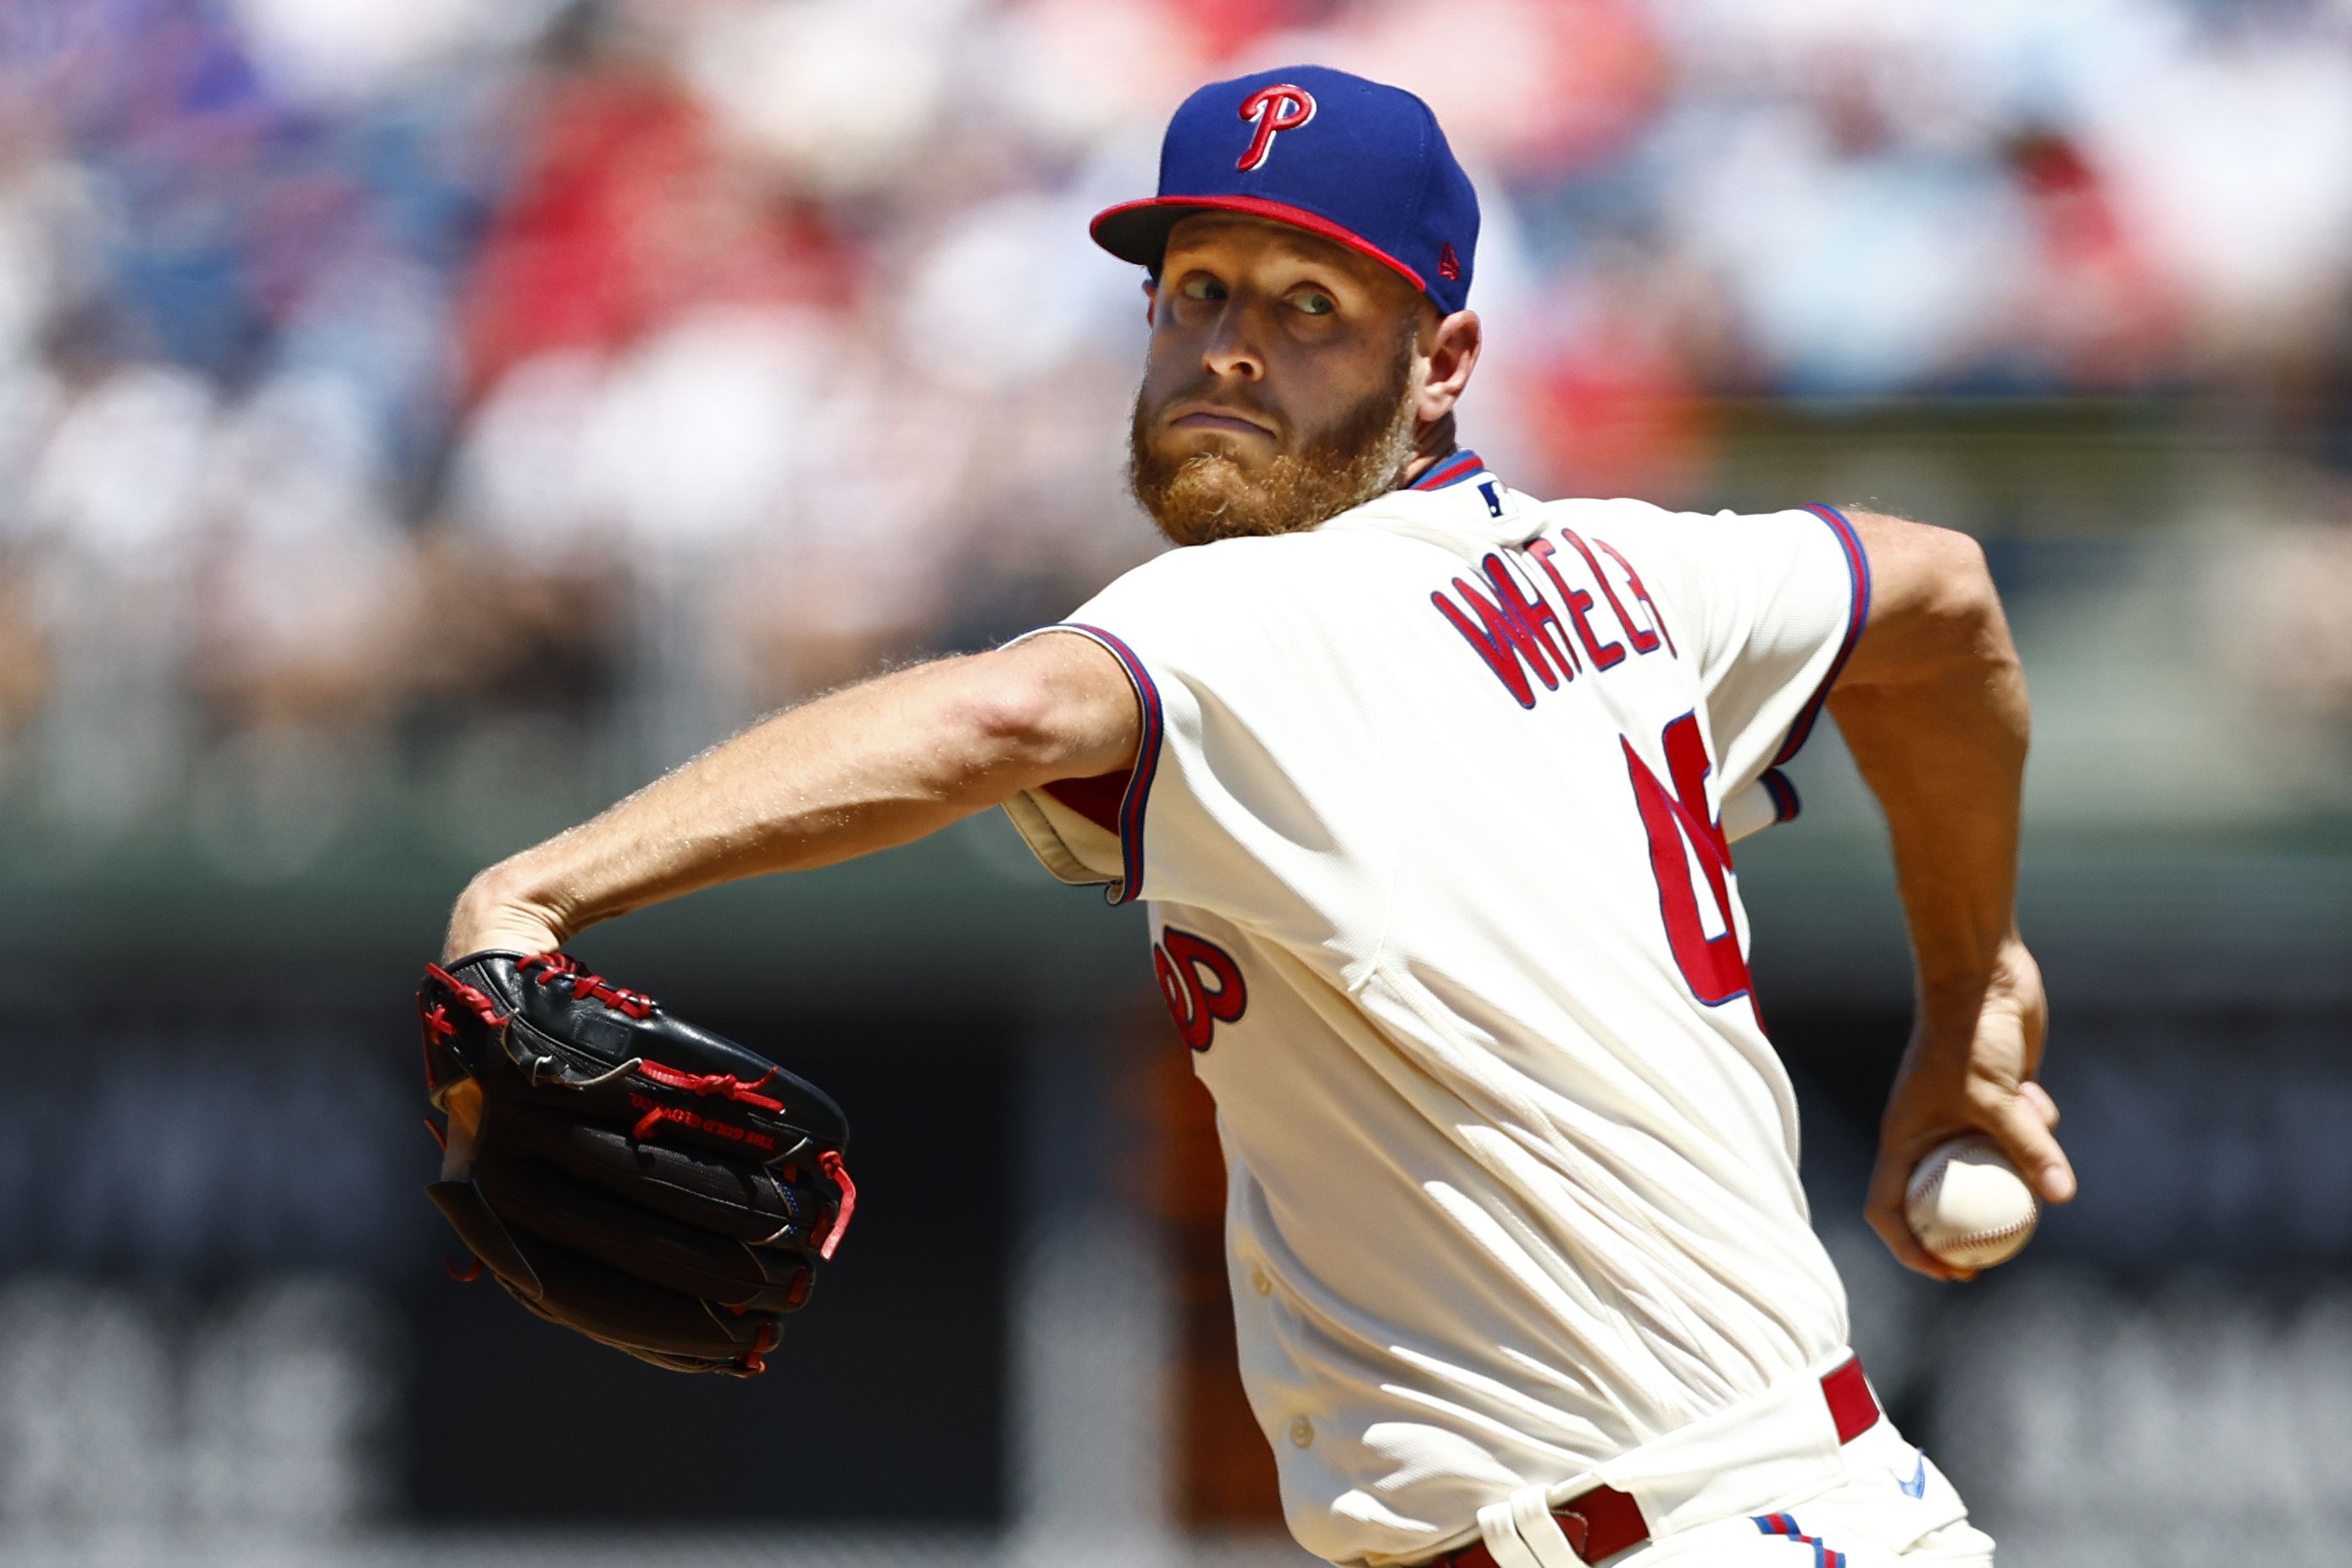 Zack Wheeler shines, but to no avail as Phillies fall to Blue Jays